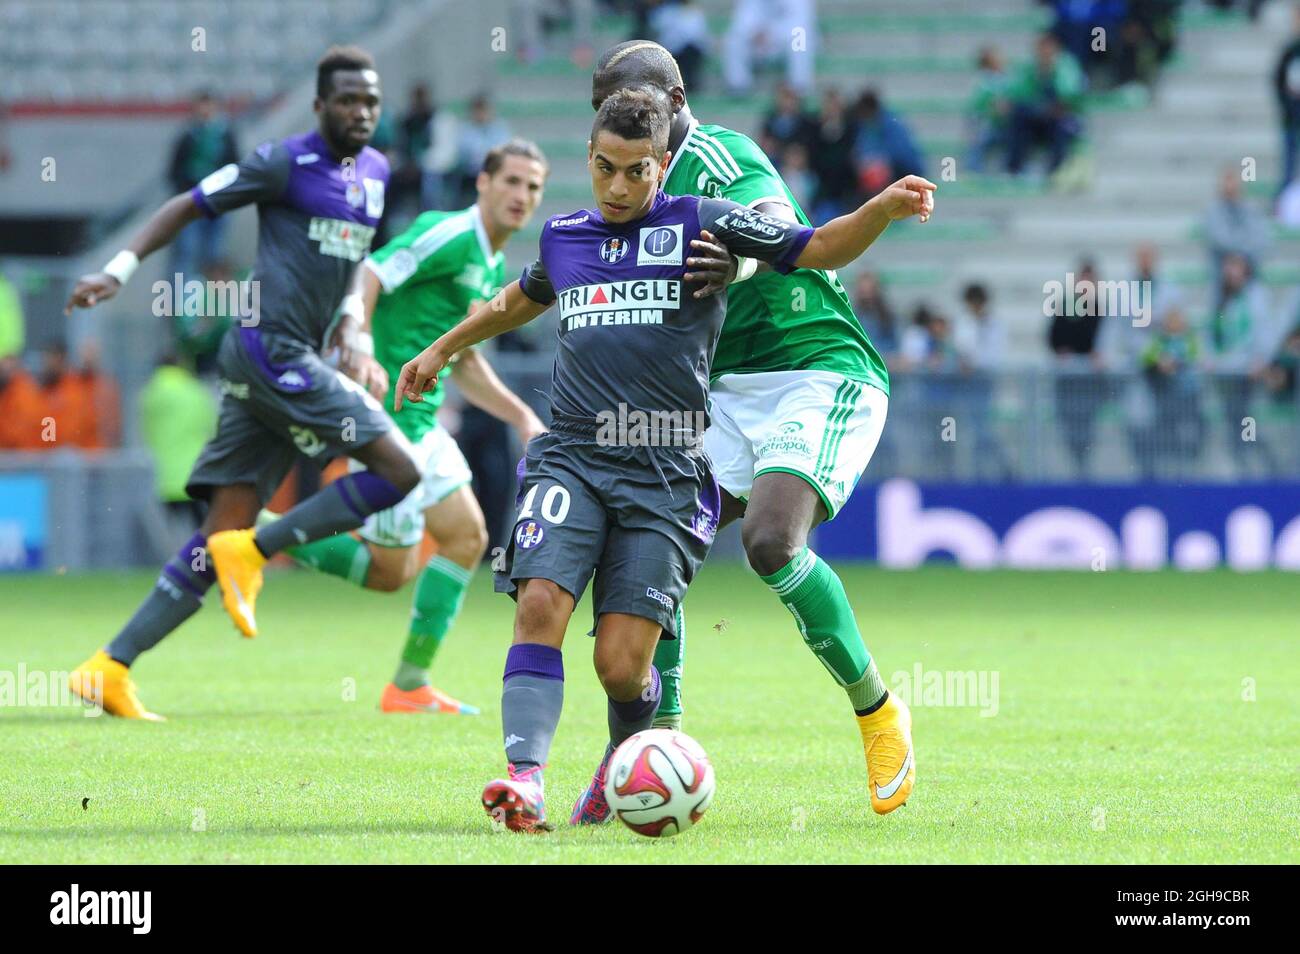 Wissam Ben Yedder during the French Ligue 1 match between AS Saint Etienne and Toulouse at the Stade Geoffroy Guichard in France on October 05, 2014. Stock Photo